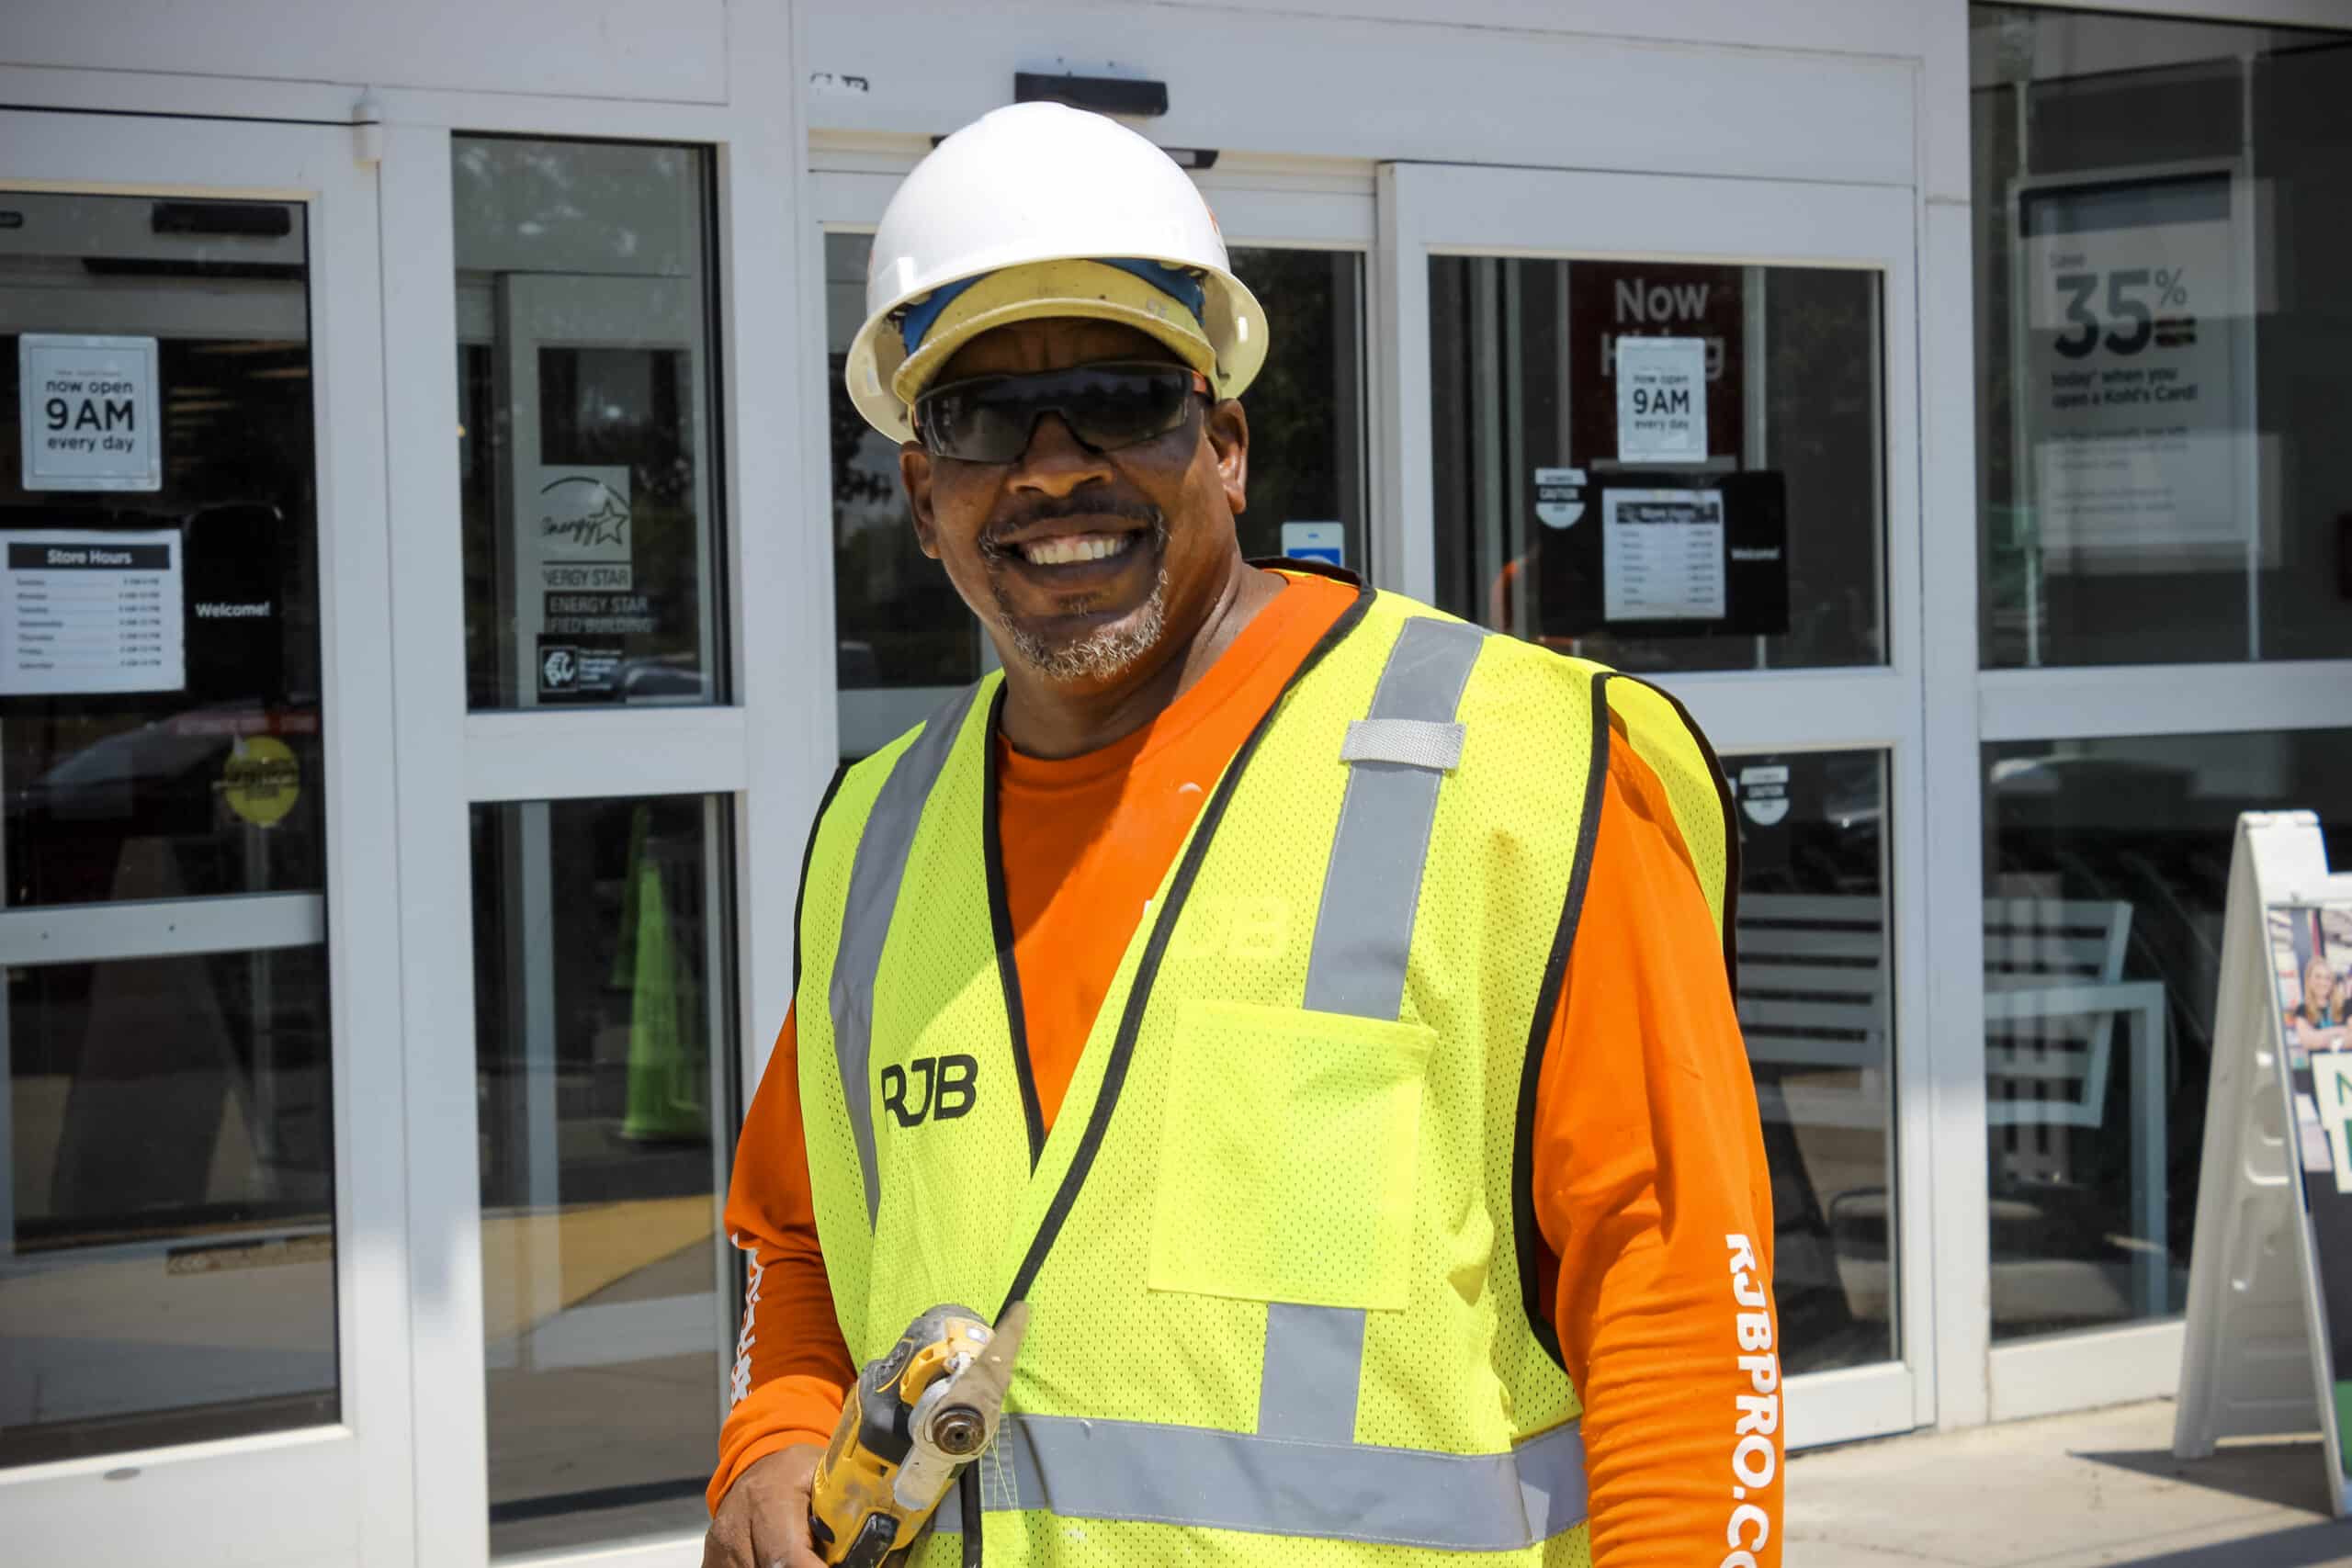 RJB Employee smiling in front of a retail building during a building coating project